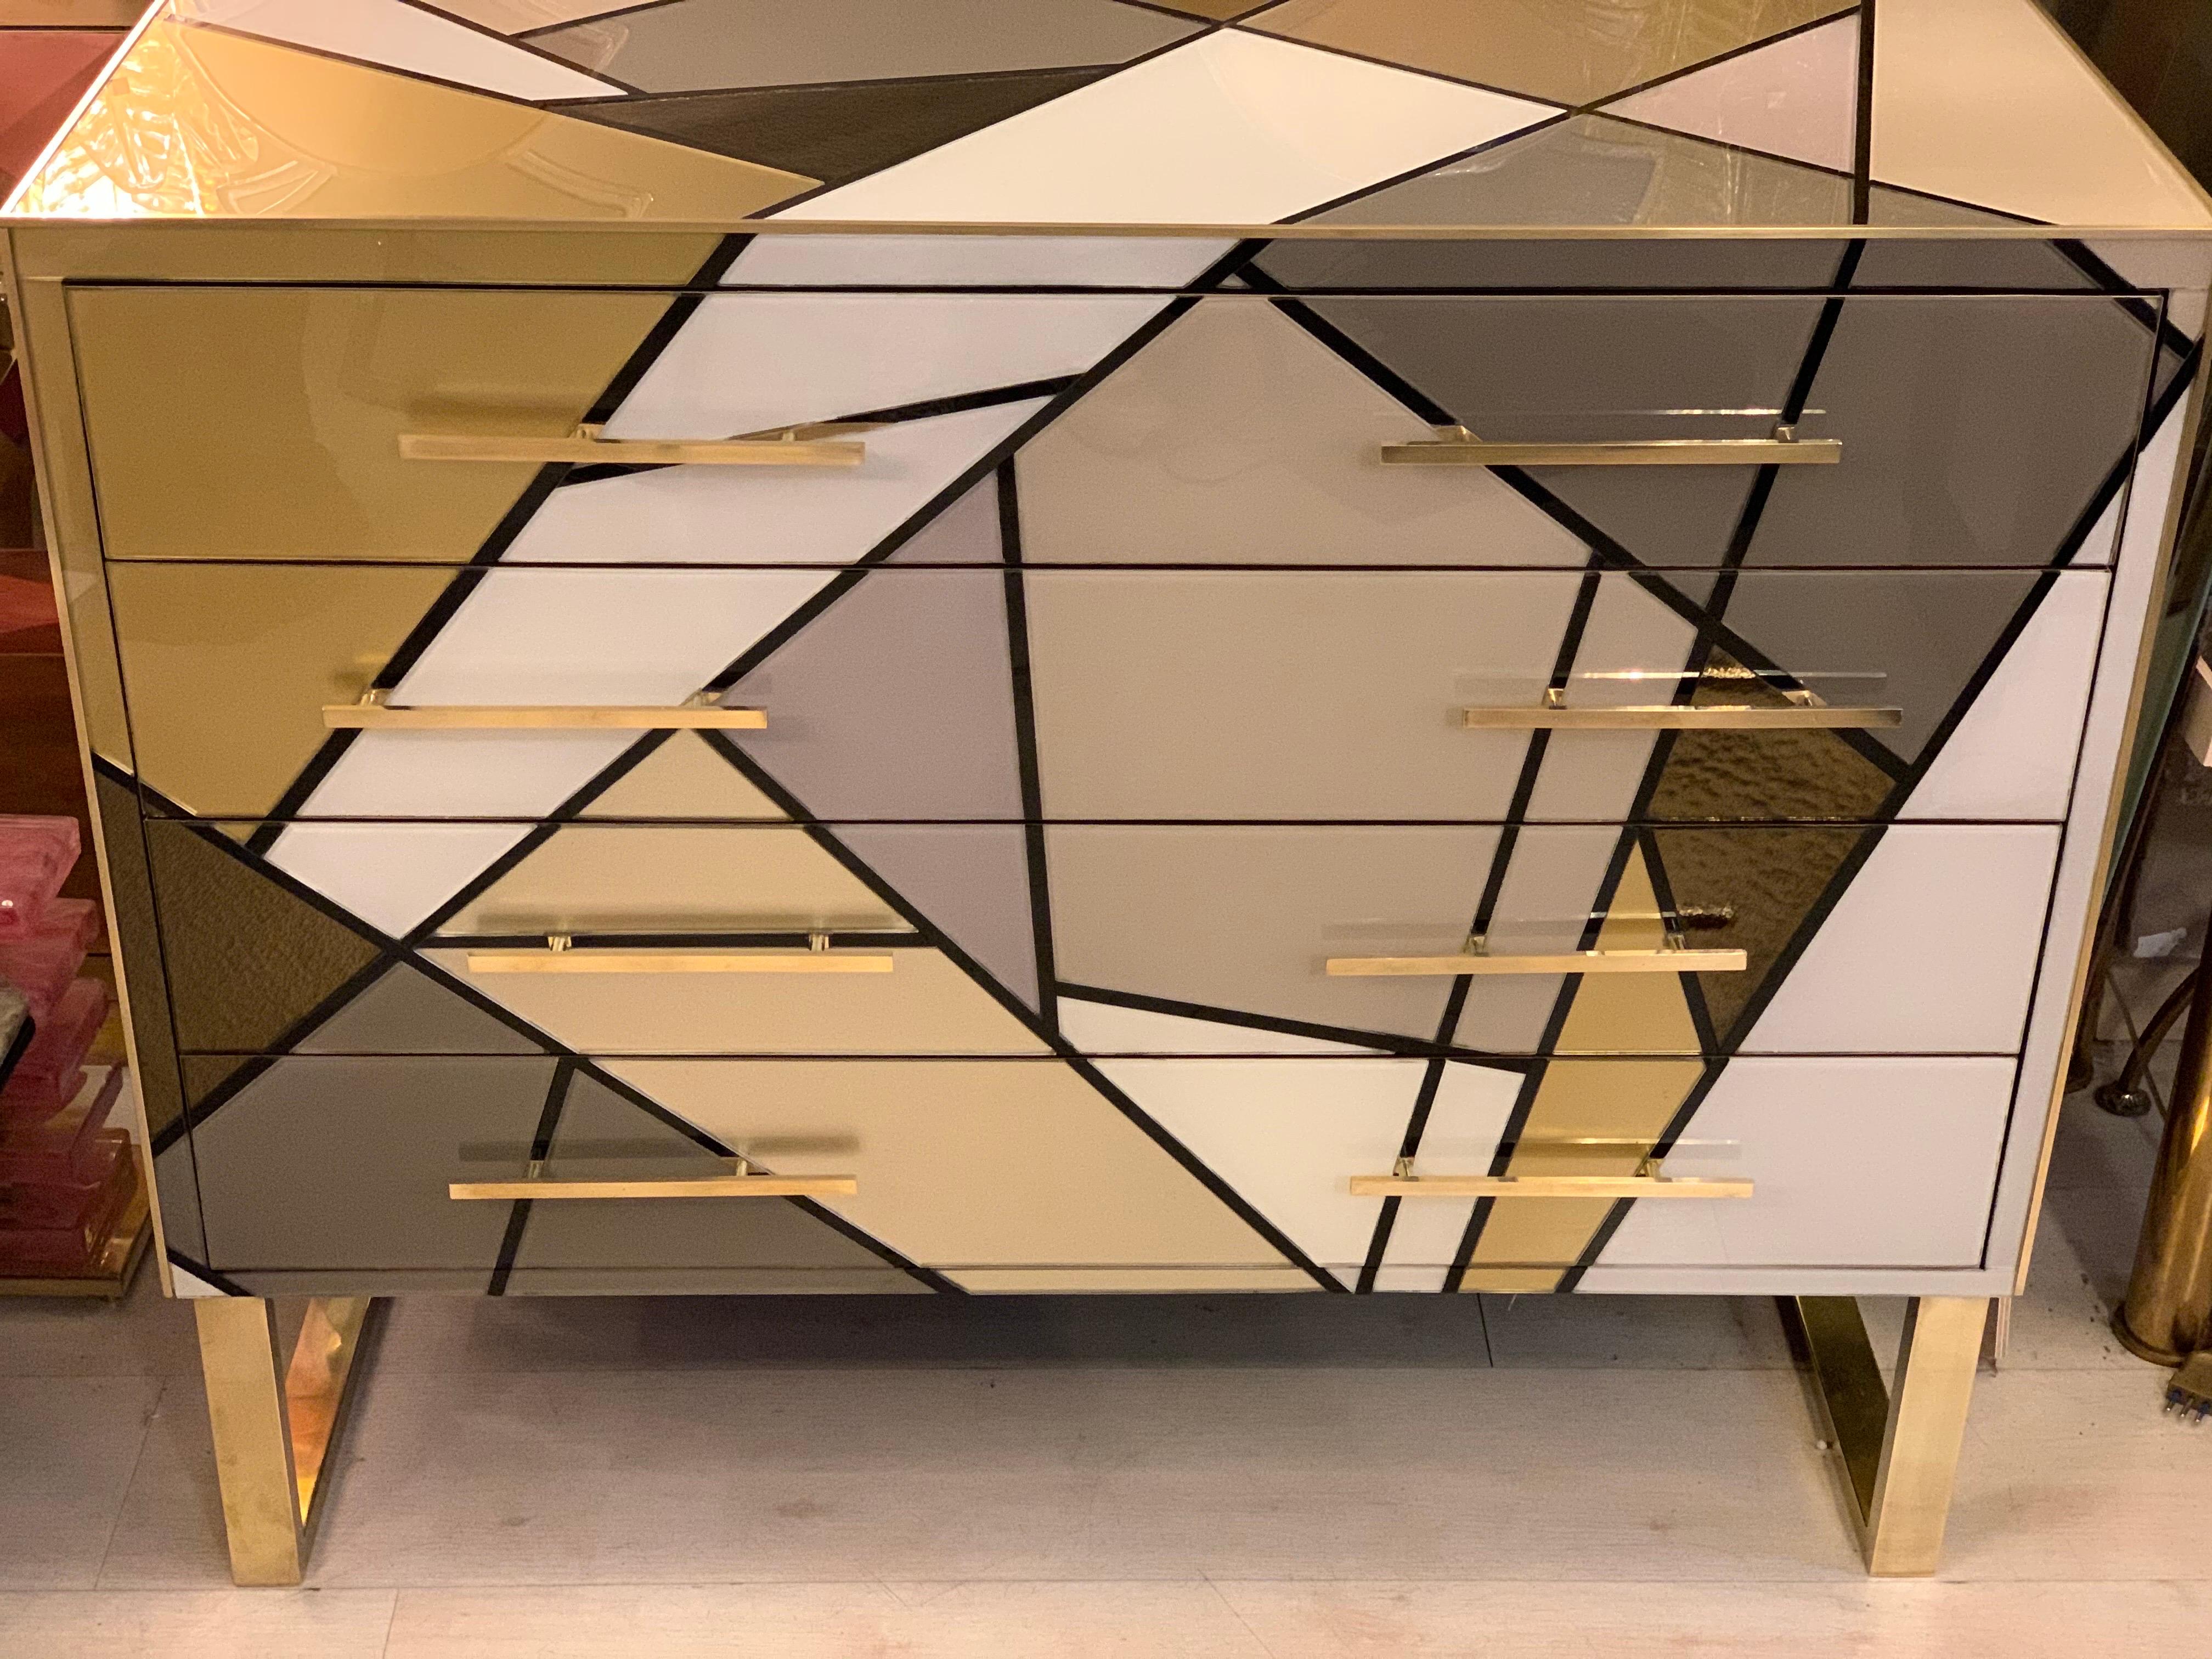 1980s Italian Multicolored Opaline Glass Chest of Drawers with Geometric Design For Sale 4